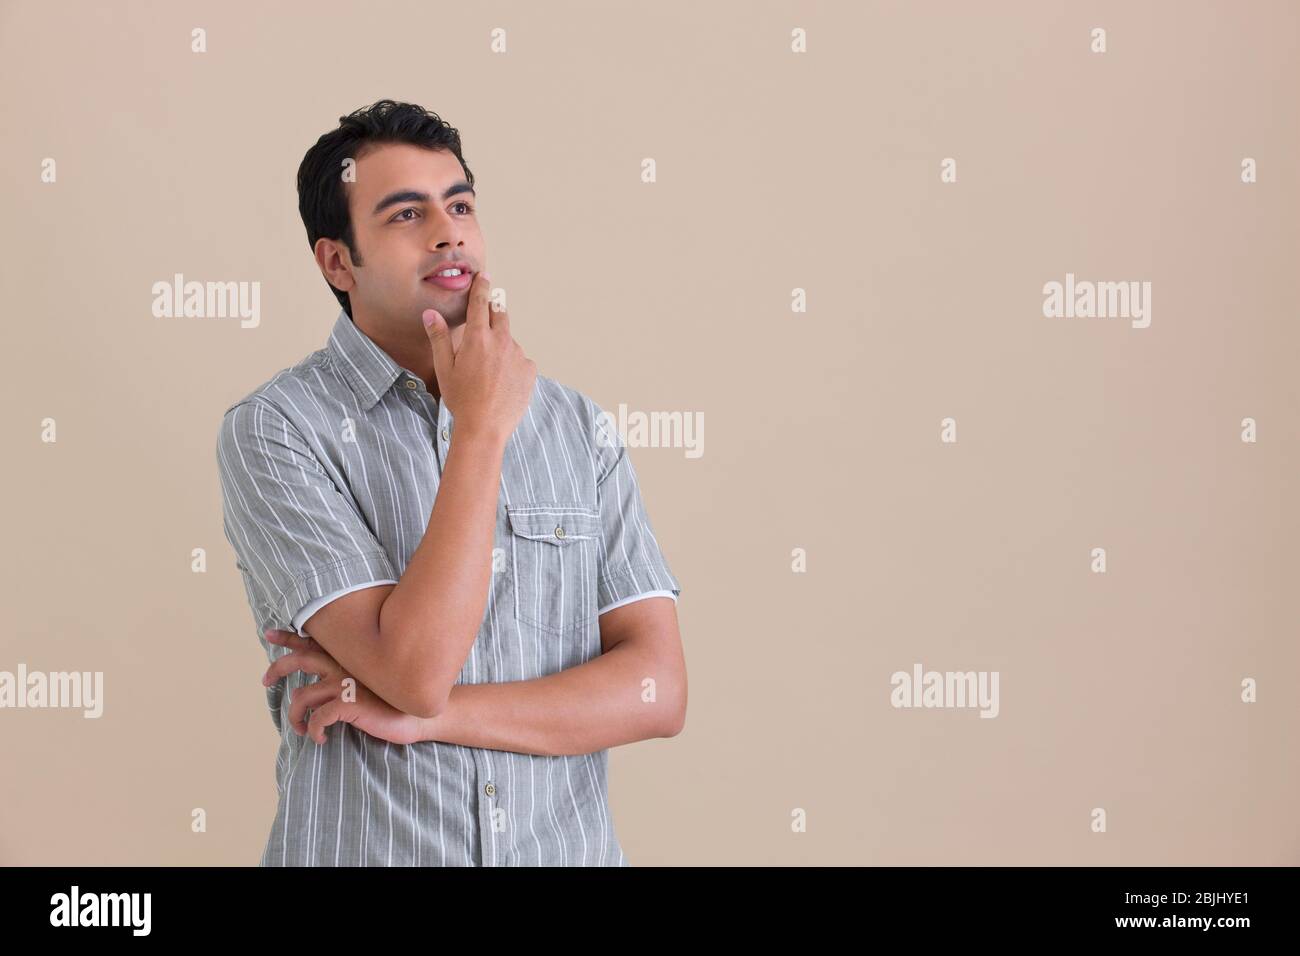 Young man thinking Stock Photo